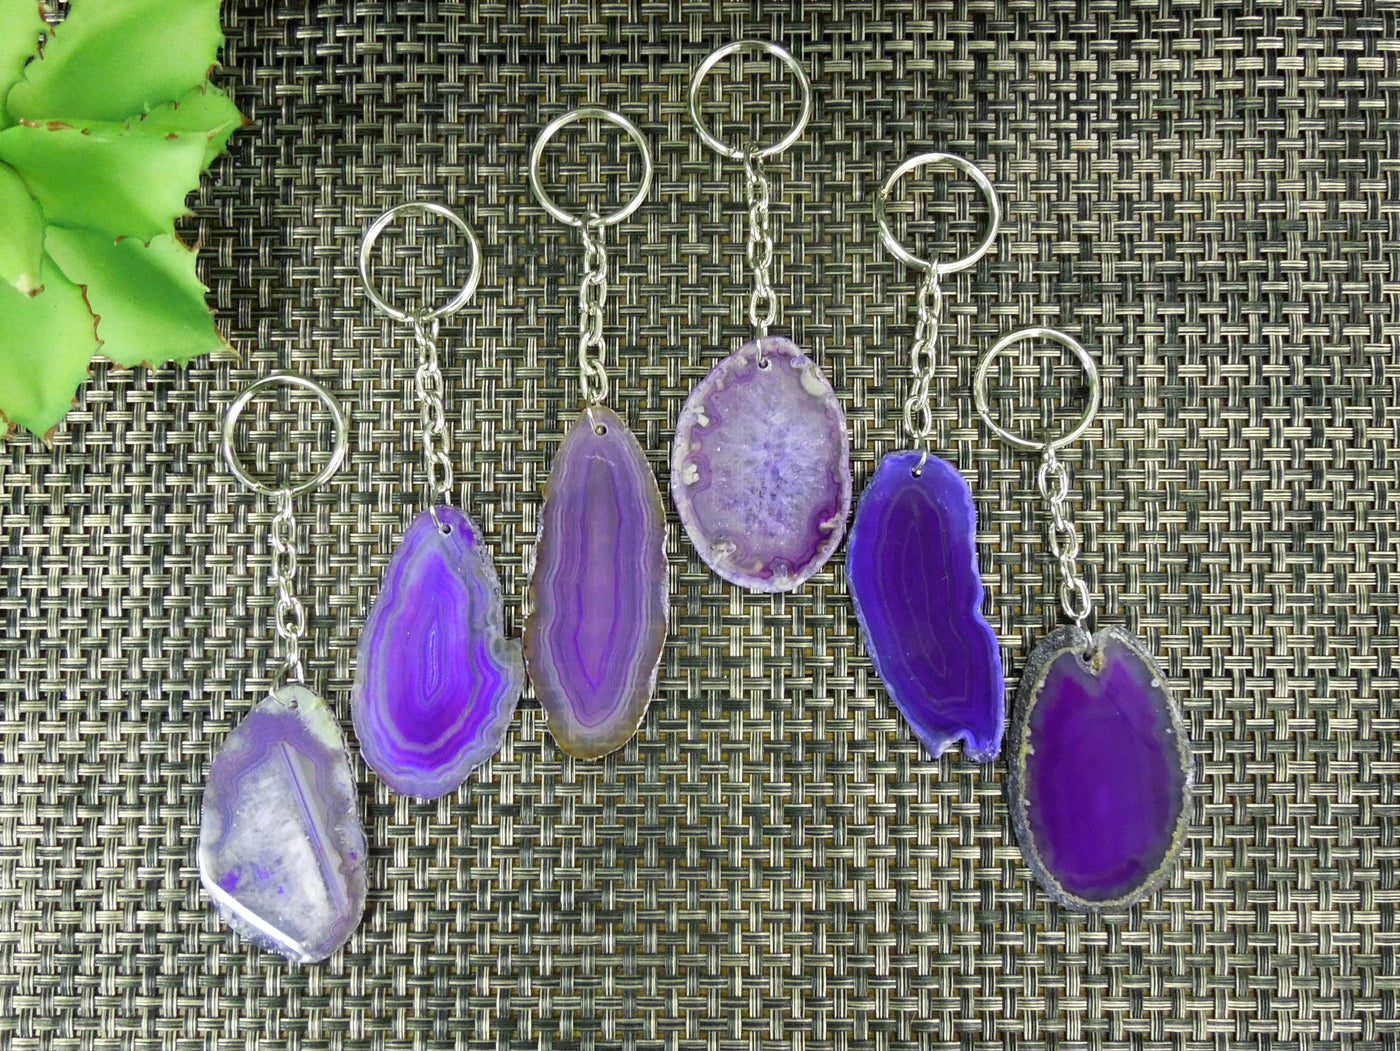 Multiple purple agate keychains on a dark colored background displaying color, size, pattern and shape variation.